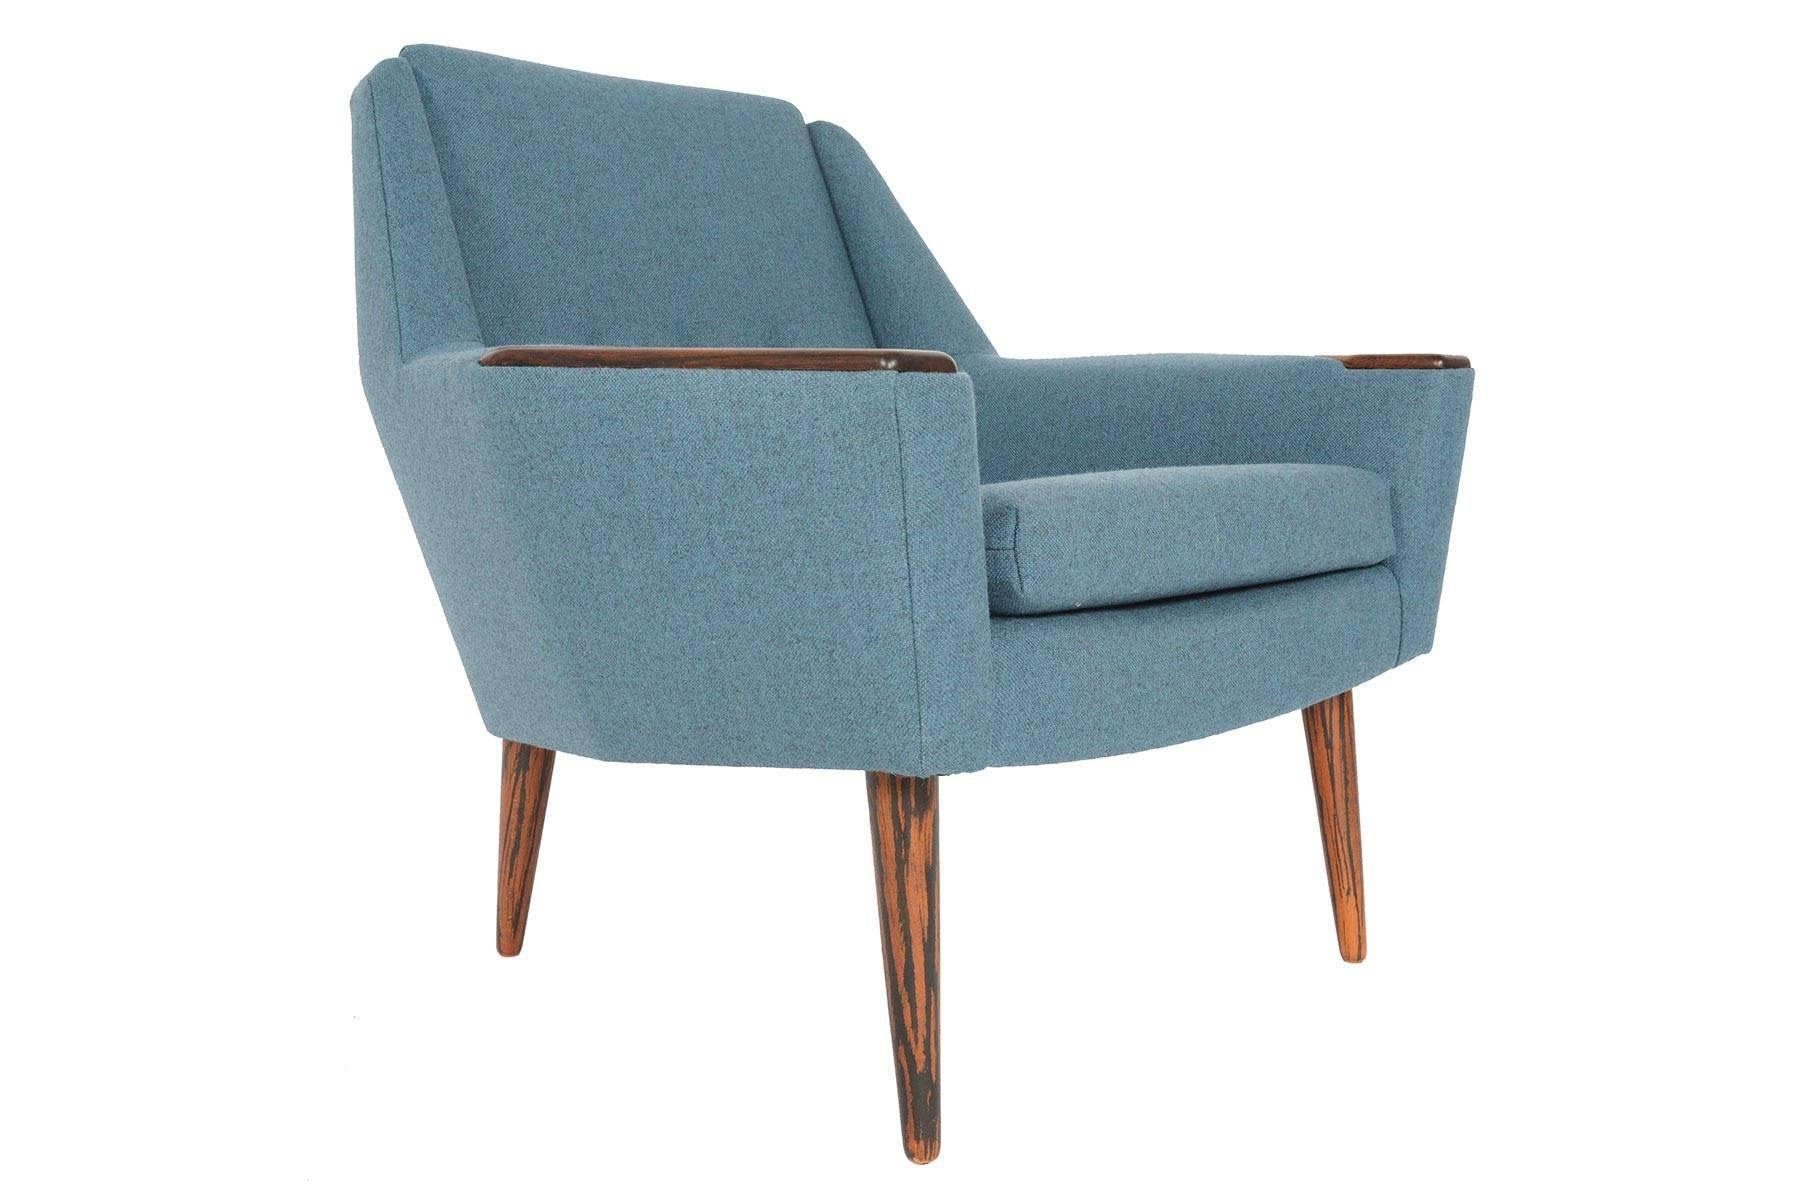 This Space Age Danish modern lounge chair features stunning angular lines of the early 1960s. Solid rosewood armrests add richness and character to this wonderful piece. Newly upholstered in cerulean Danish wool, this modern lounge will add plenty